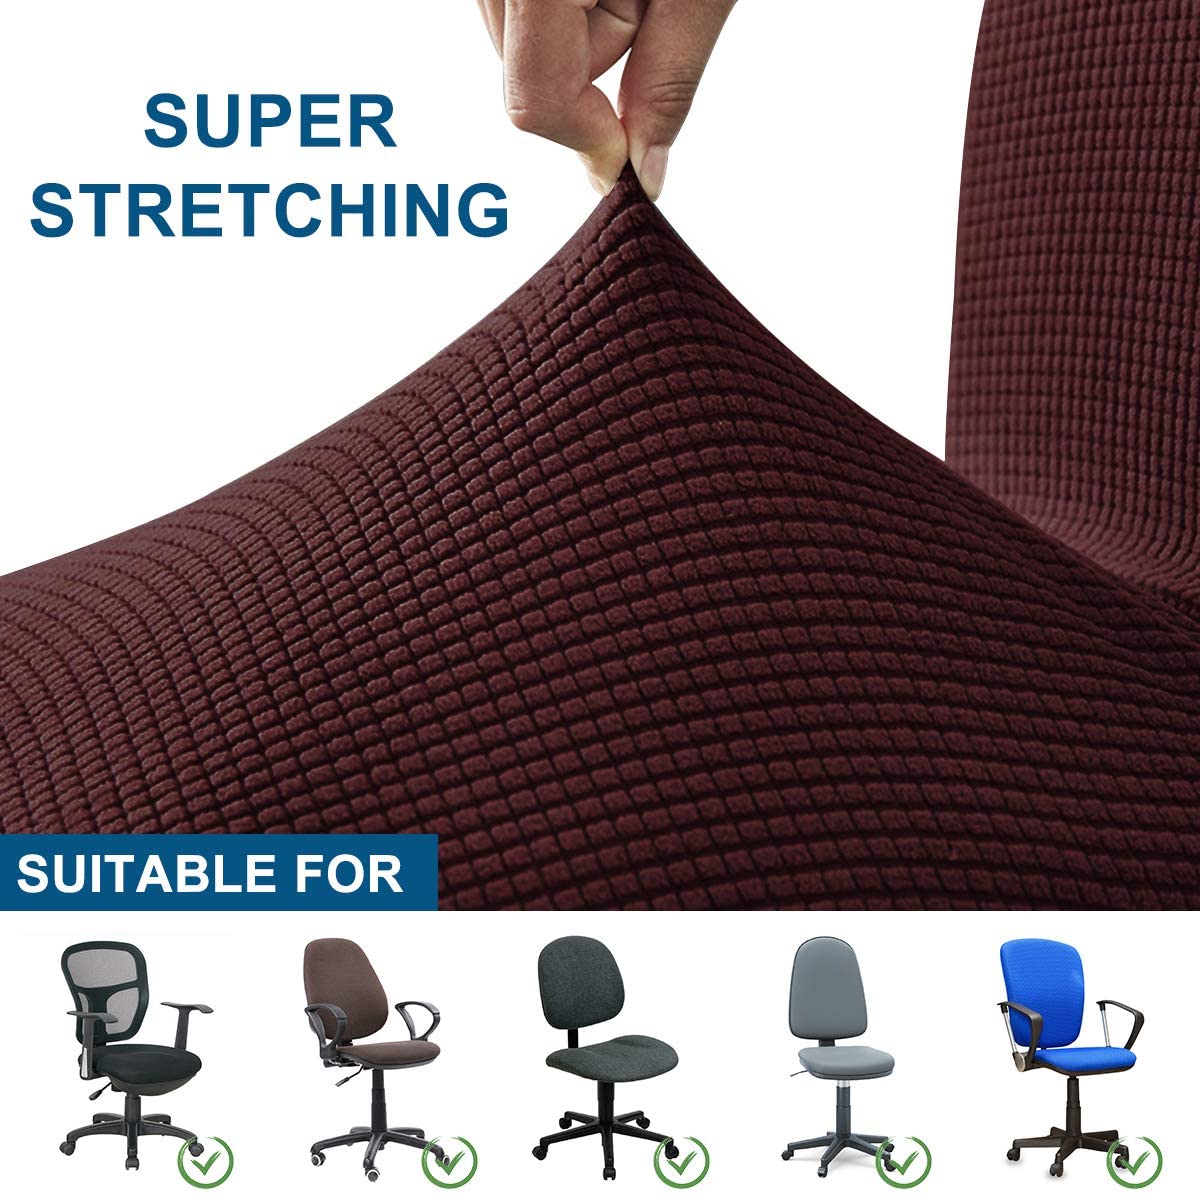 Office Chair Cover 2 Piece Stretchable Computer Office Chair Covers Universal Chair Seat Covers Stretch Rotating Chair Slipcovers Washable Spandex Desk Chair Cover Protectors - image 5 of 7